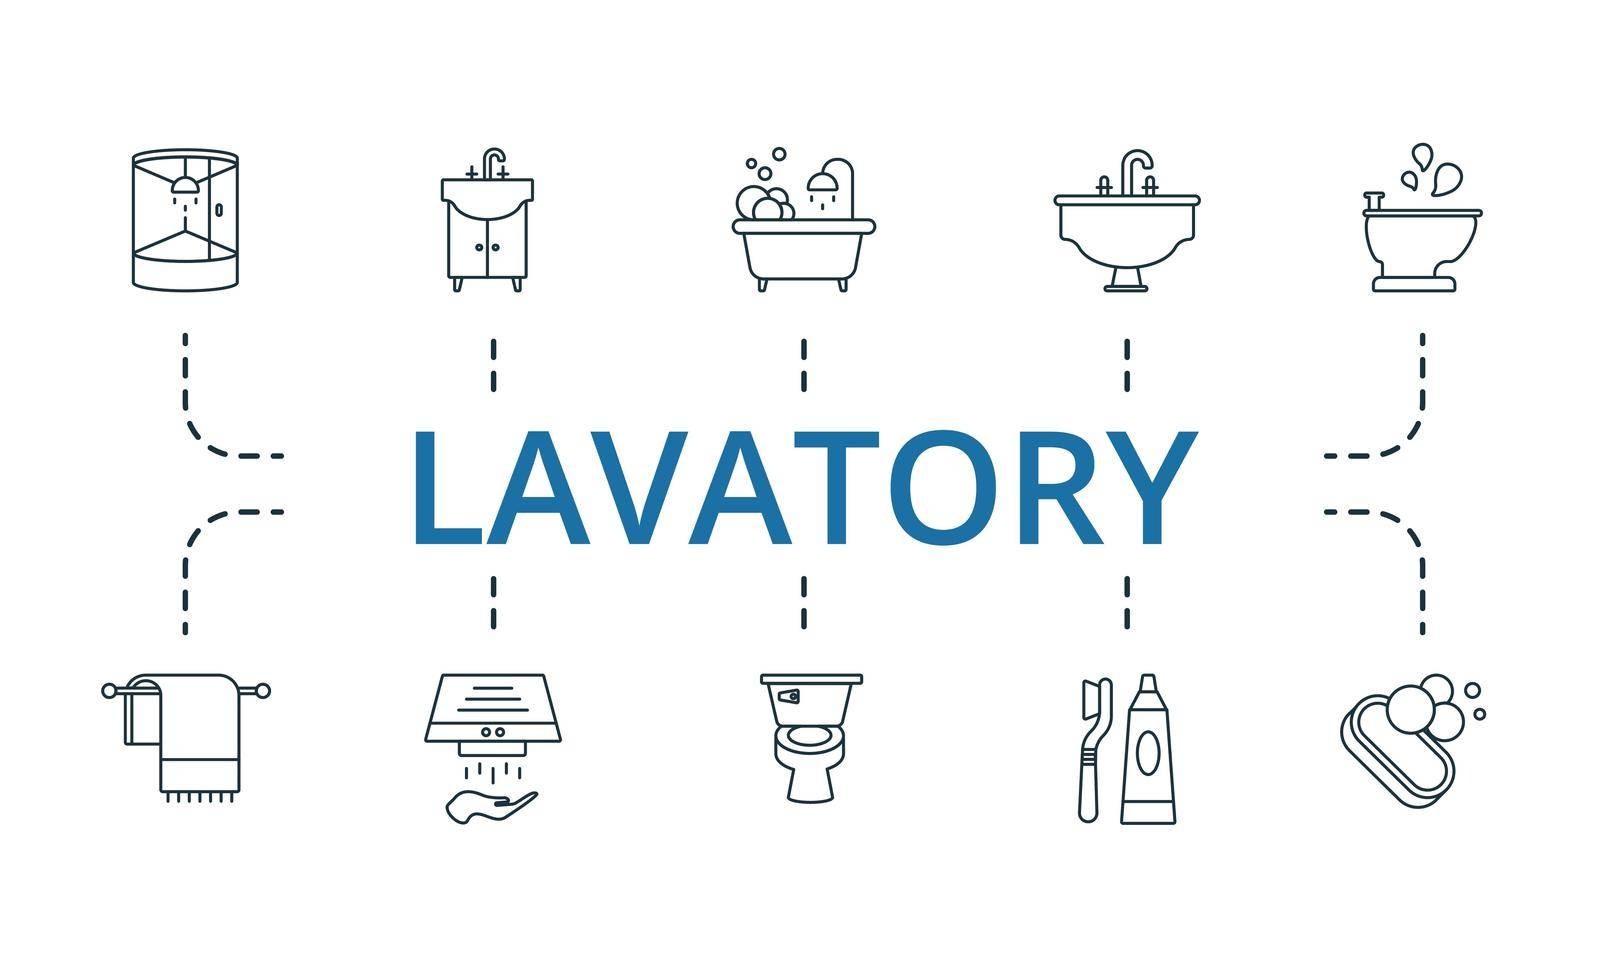 Lavatory set icon. Editable icons lavatory theme such as deposits acceptance, funds remittance, bill payment services and more. by simakovavector